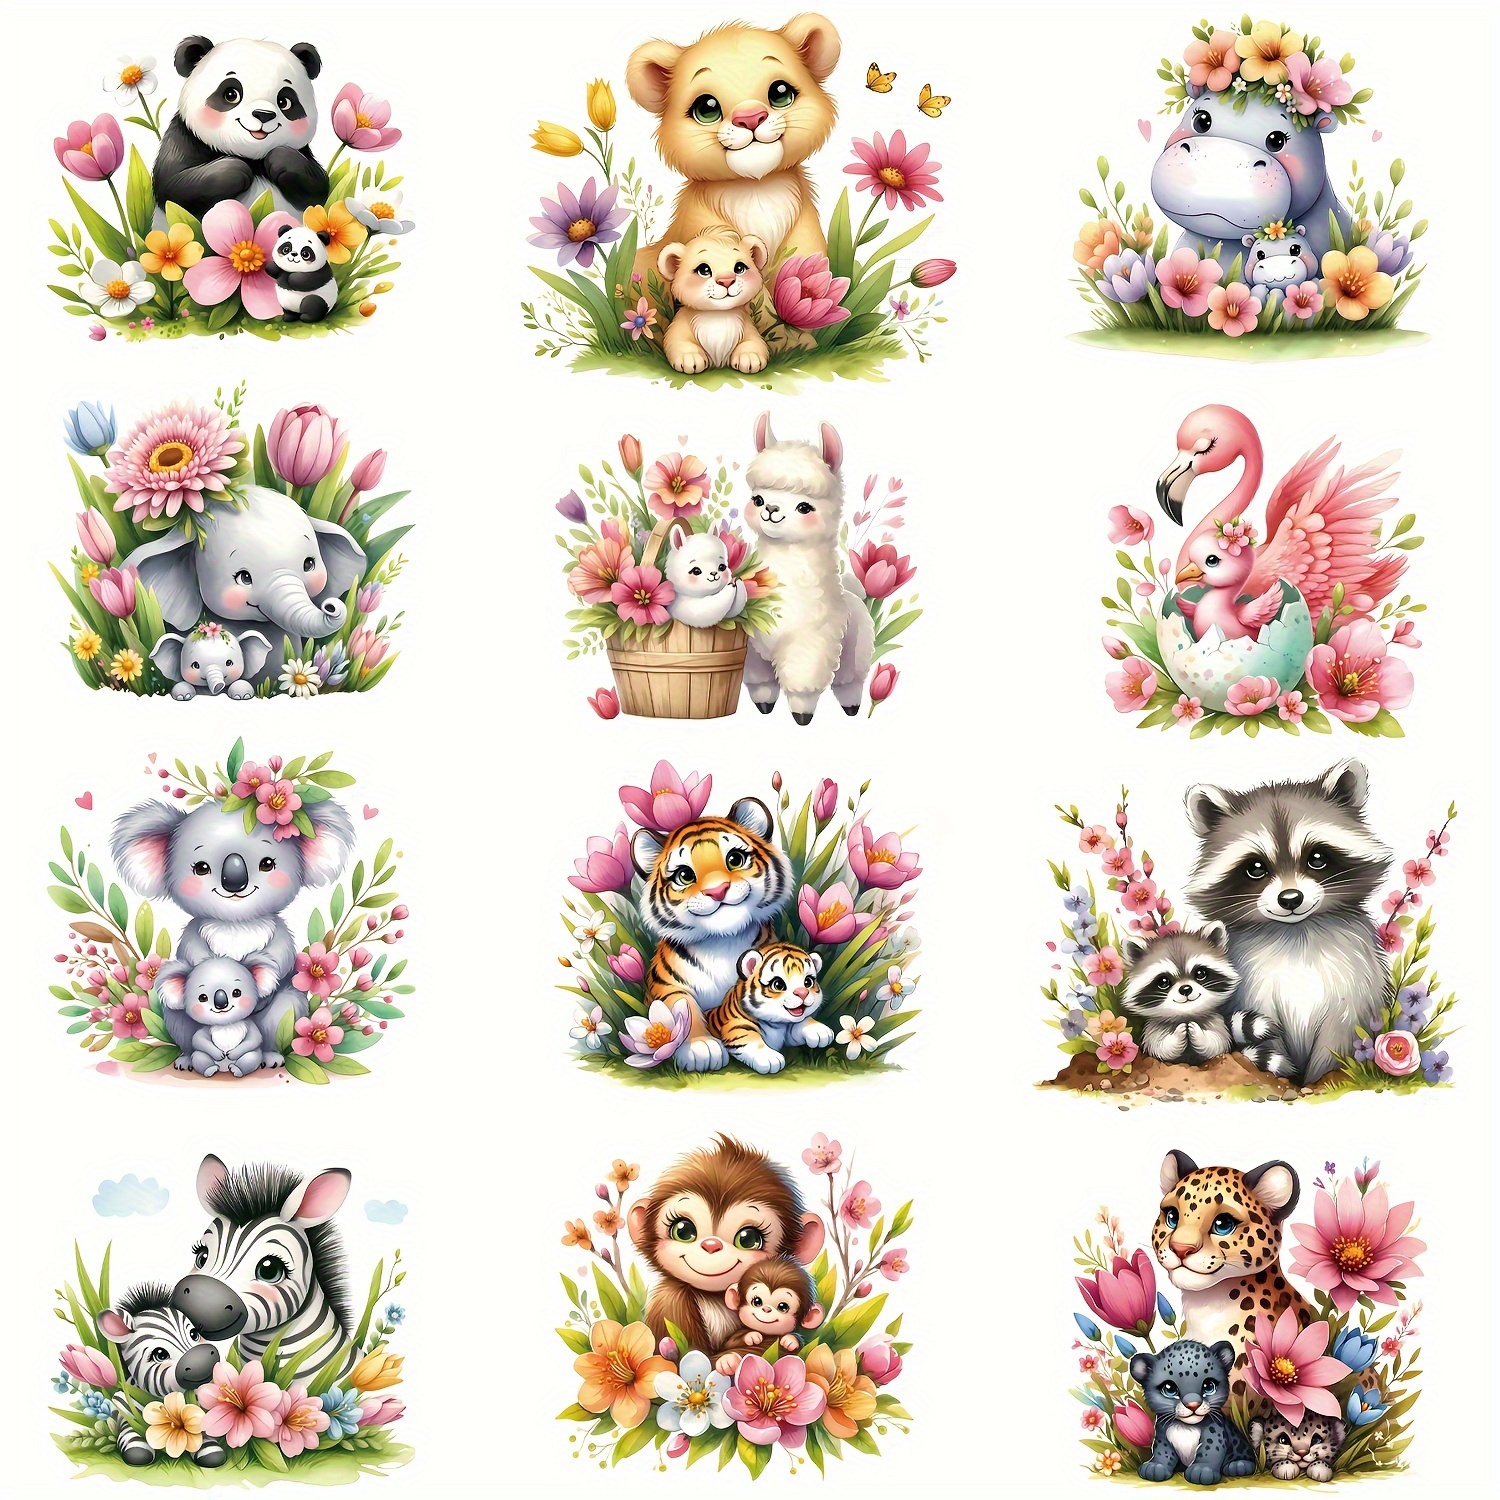 

12pcs Cute Animal & Floral Iron-on Vinyl Patches, Heat Press Decals For Diy T-shirts, Jeans, Hoodies, Handbags & Pillows, Pocket Size Transfers For Mother's Day